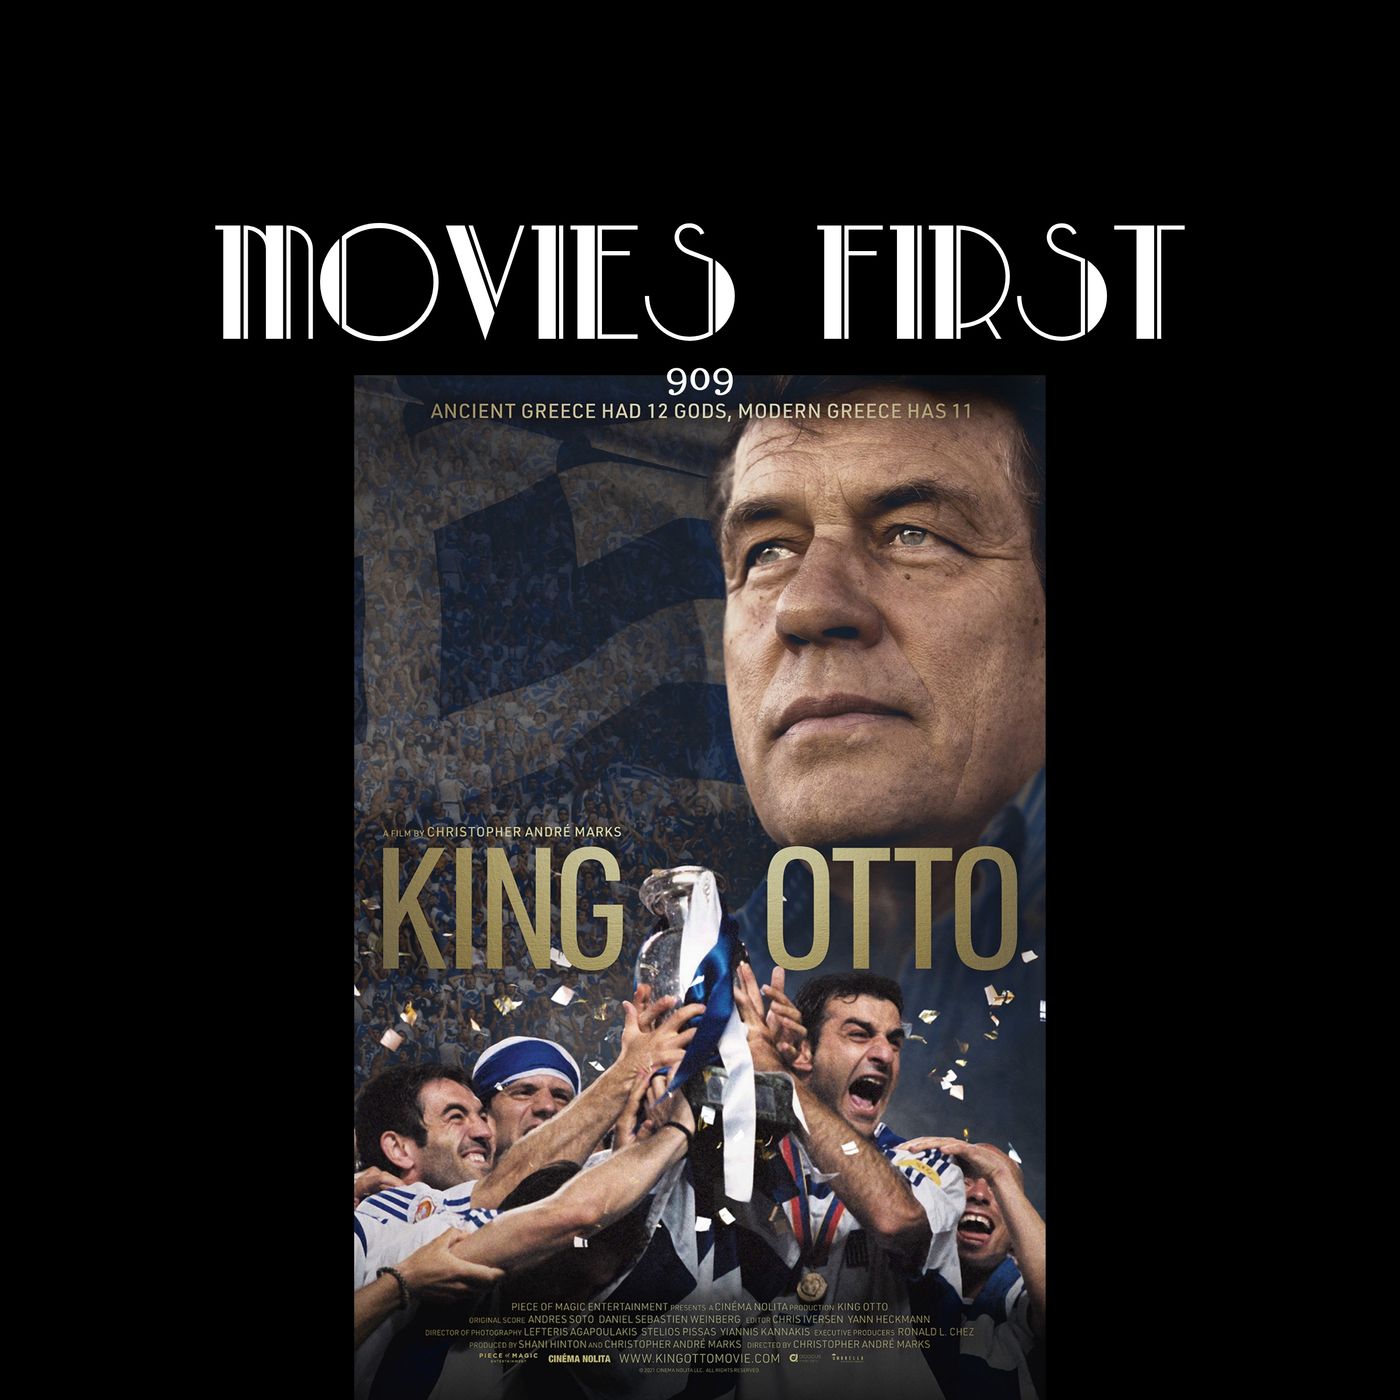 King Otto (Documentary, Sport) (the @MoviesFirst review)